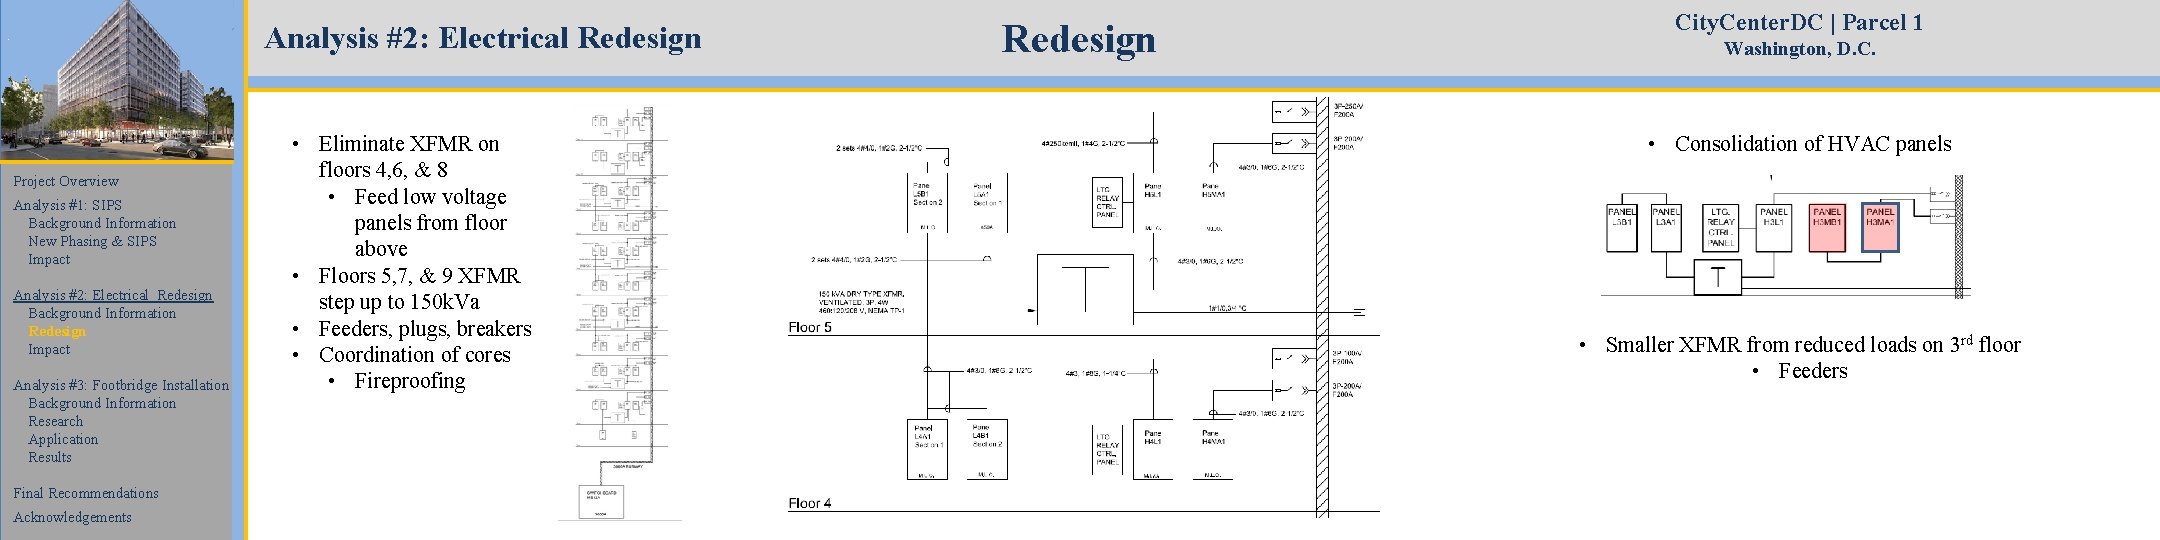 Analysis #2: Electrical Redesign Project Overview Analysis #1: SIPS Background Information New Phasing &